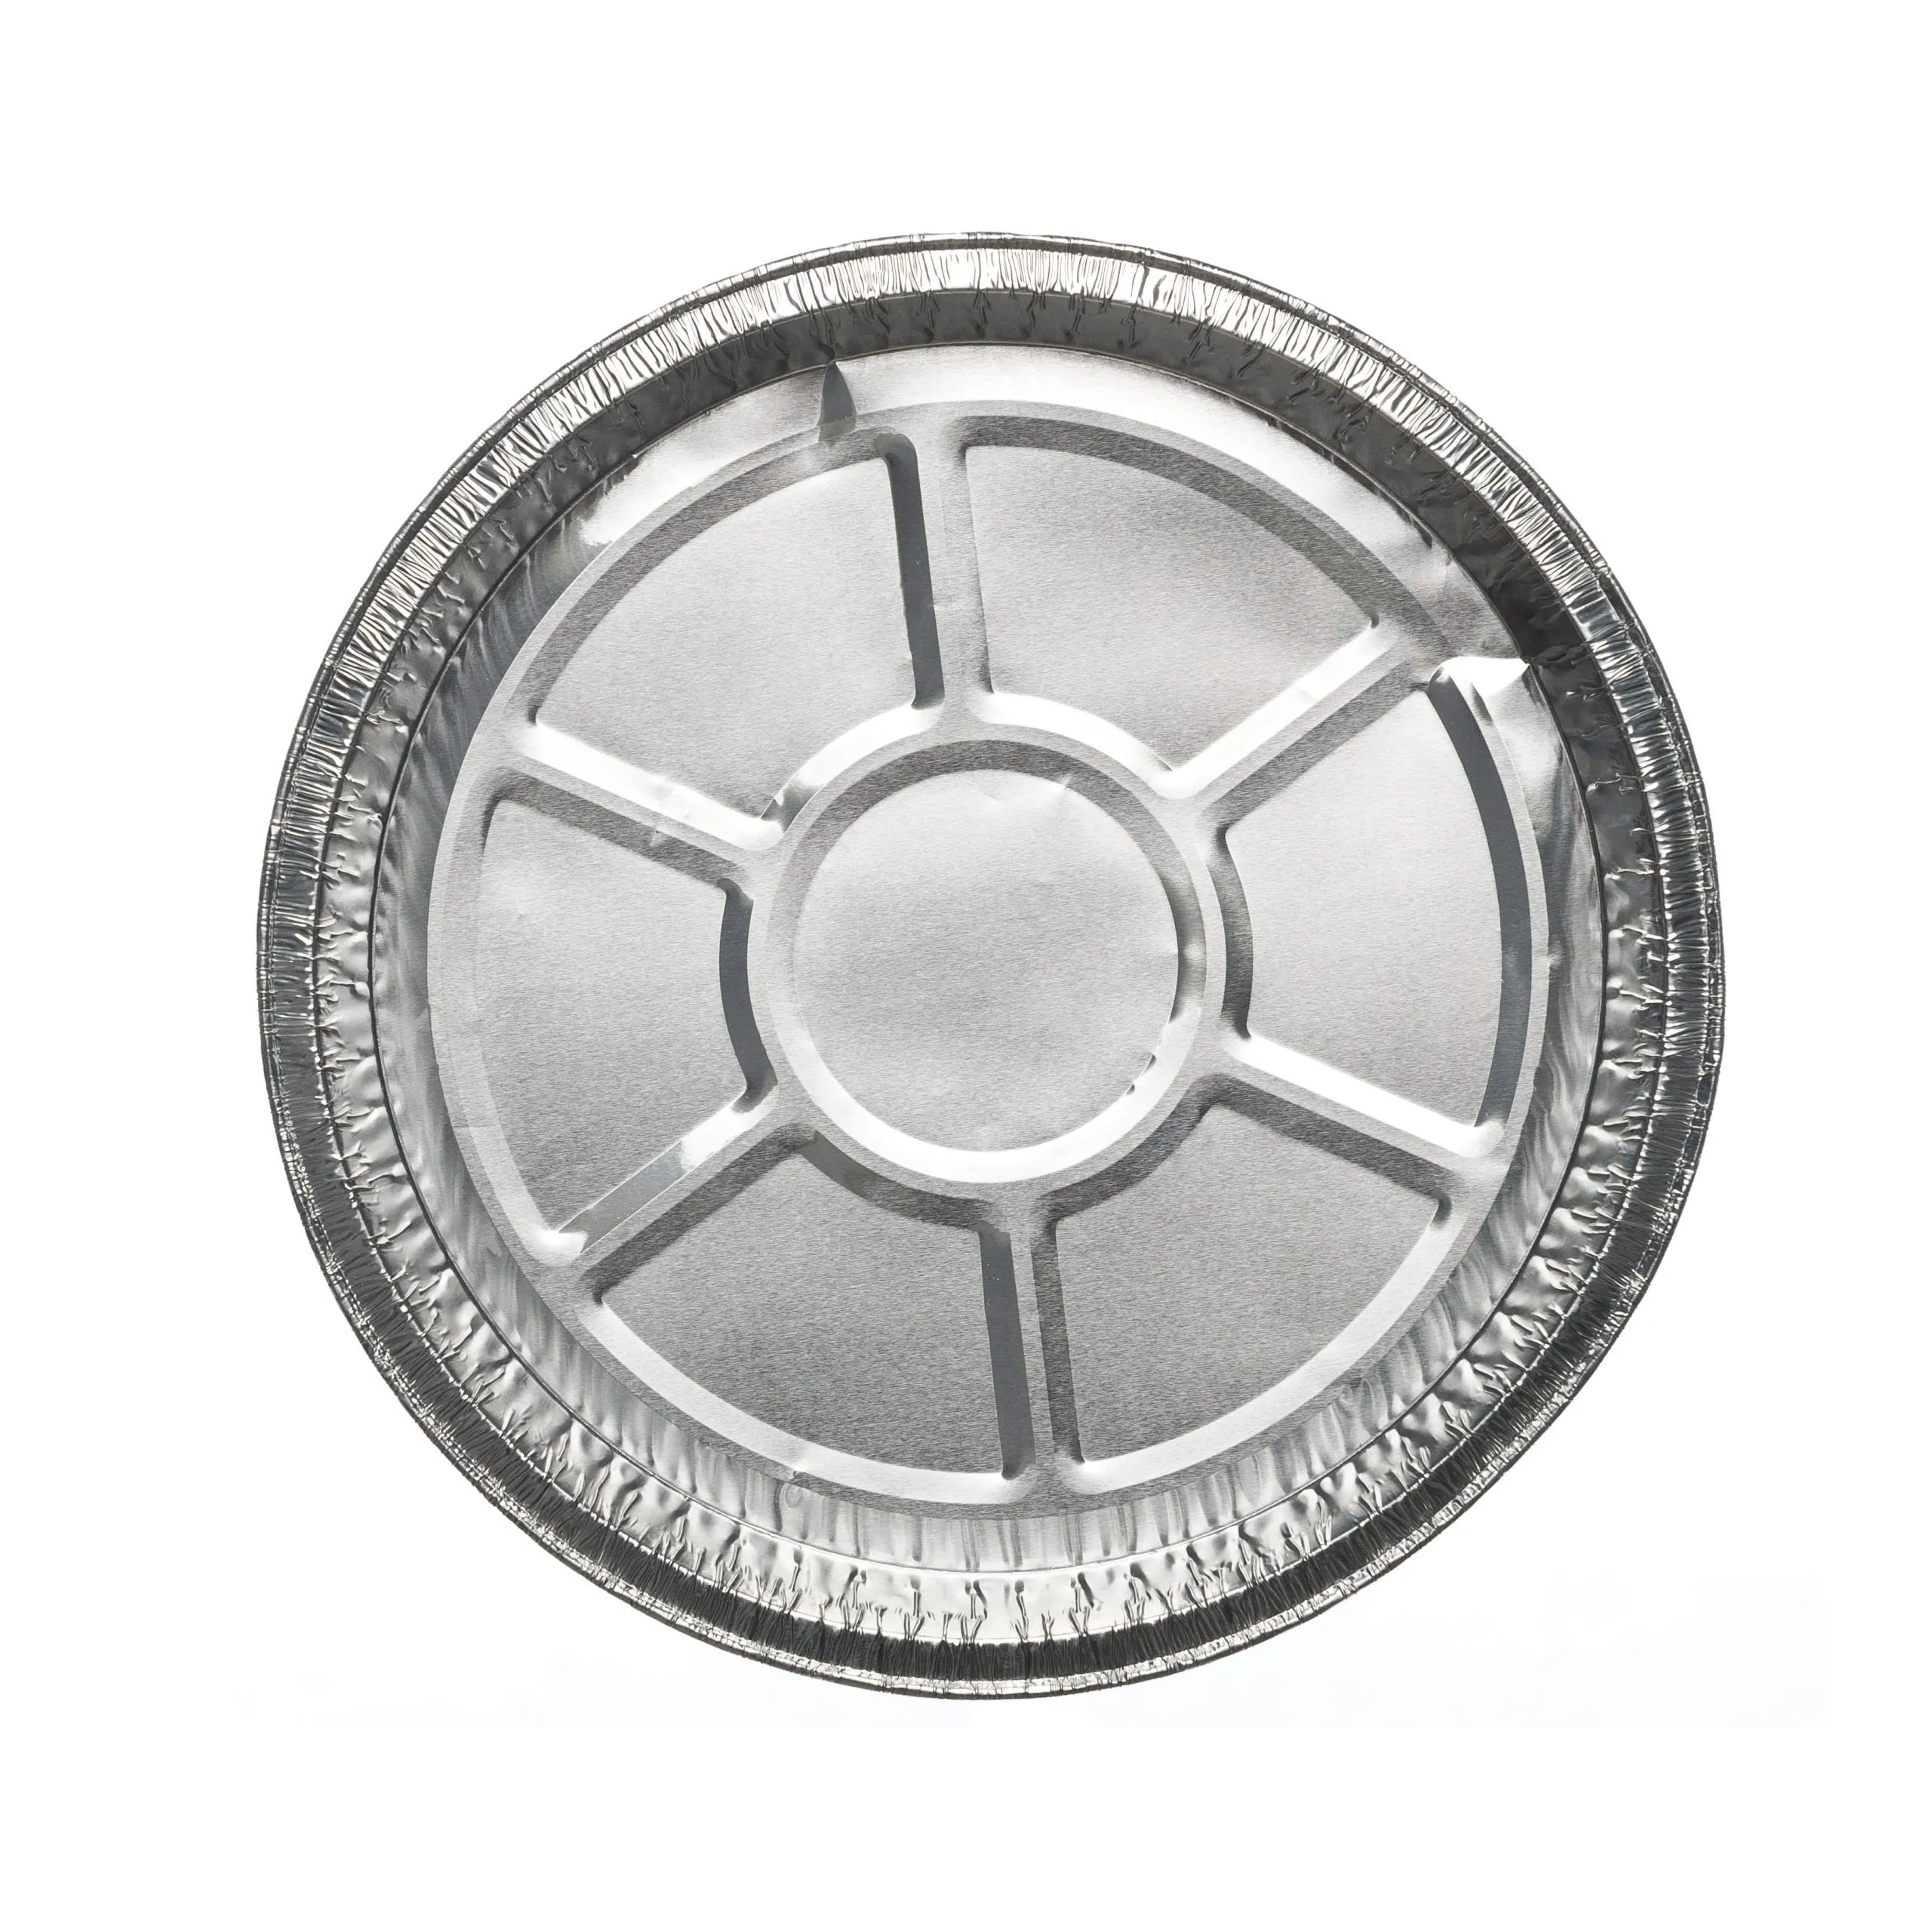 Aluminium Foil Round Serving Plate 6-Division with Dome Lid